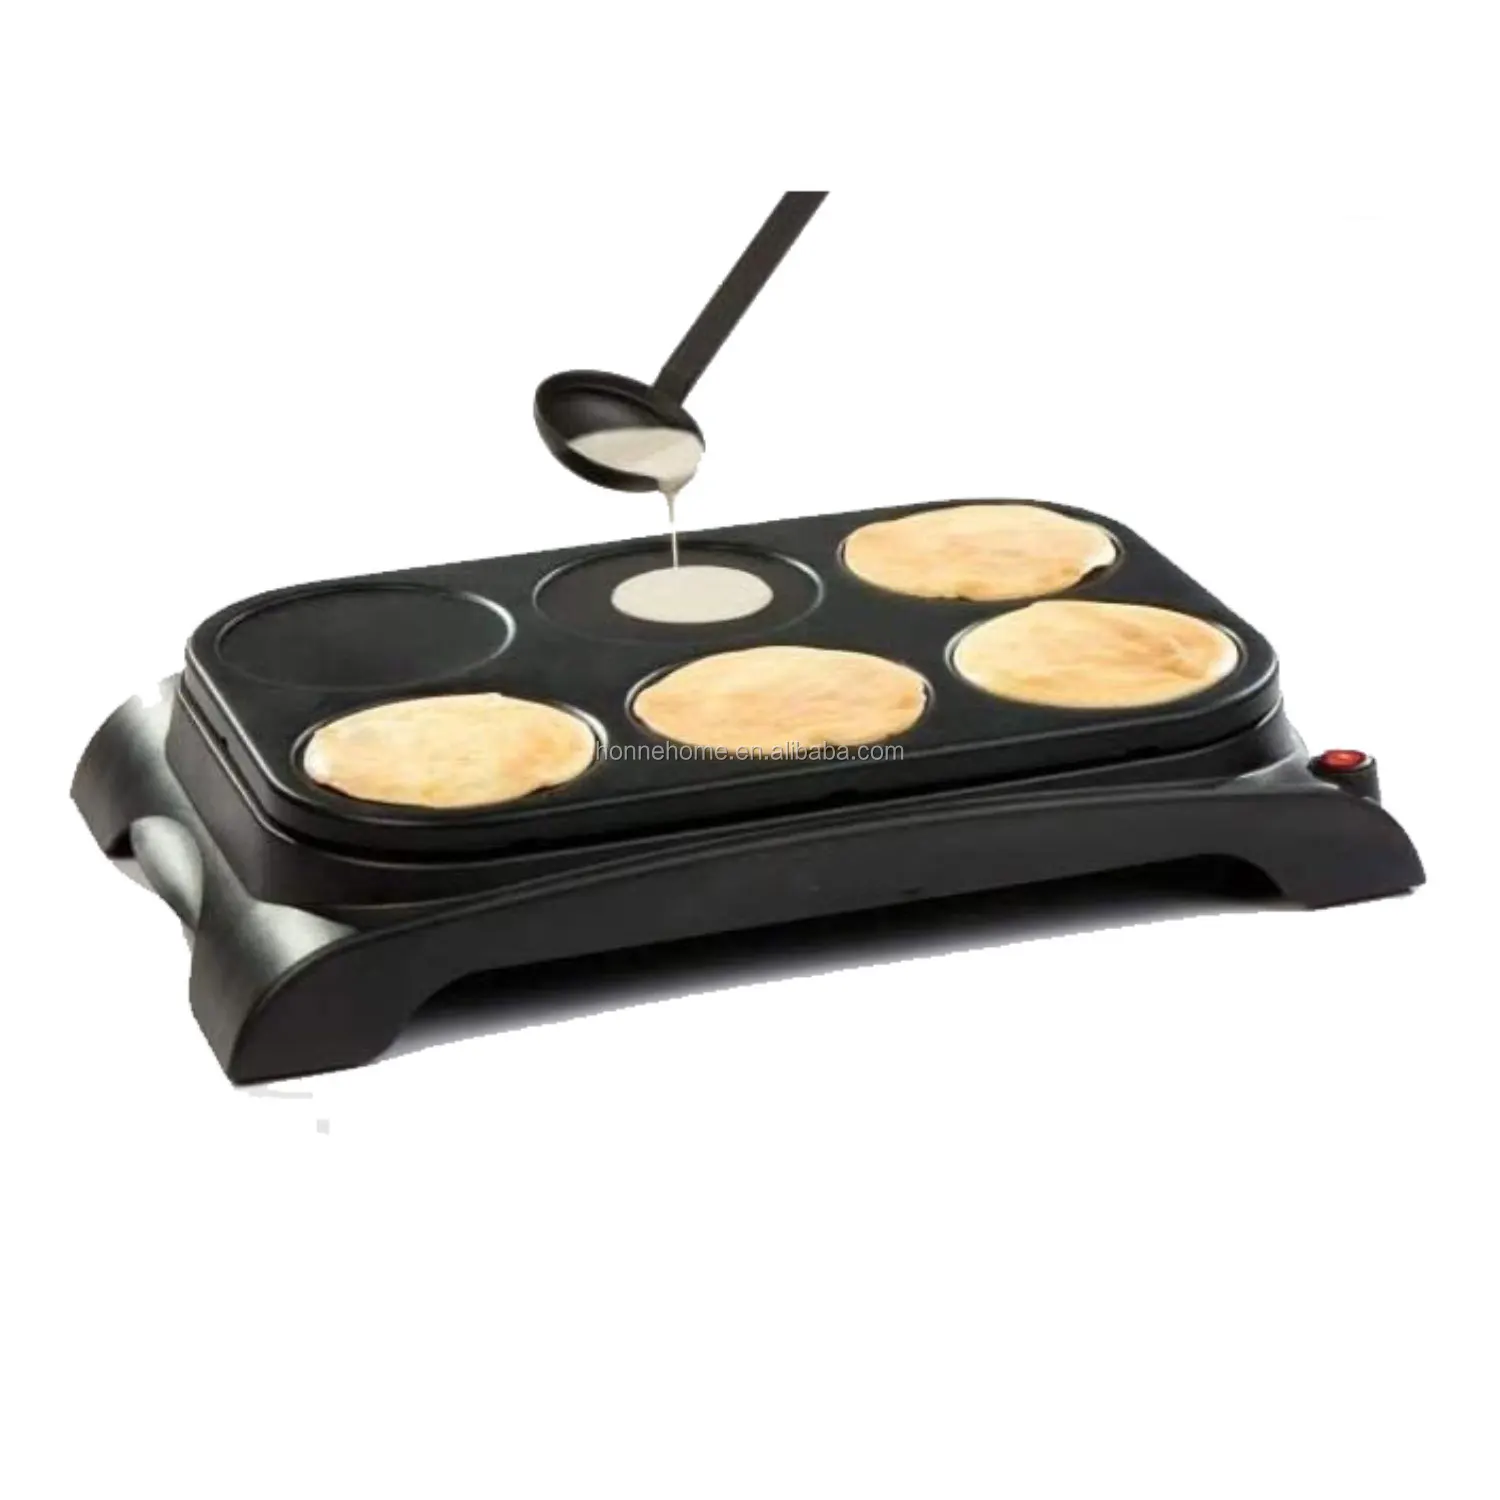 
Electric grill Party Wok Crepe Party Crepes and pancakes cooker Crepe Makers 